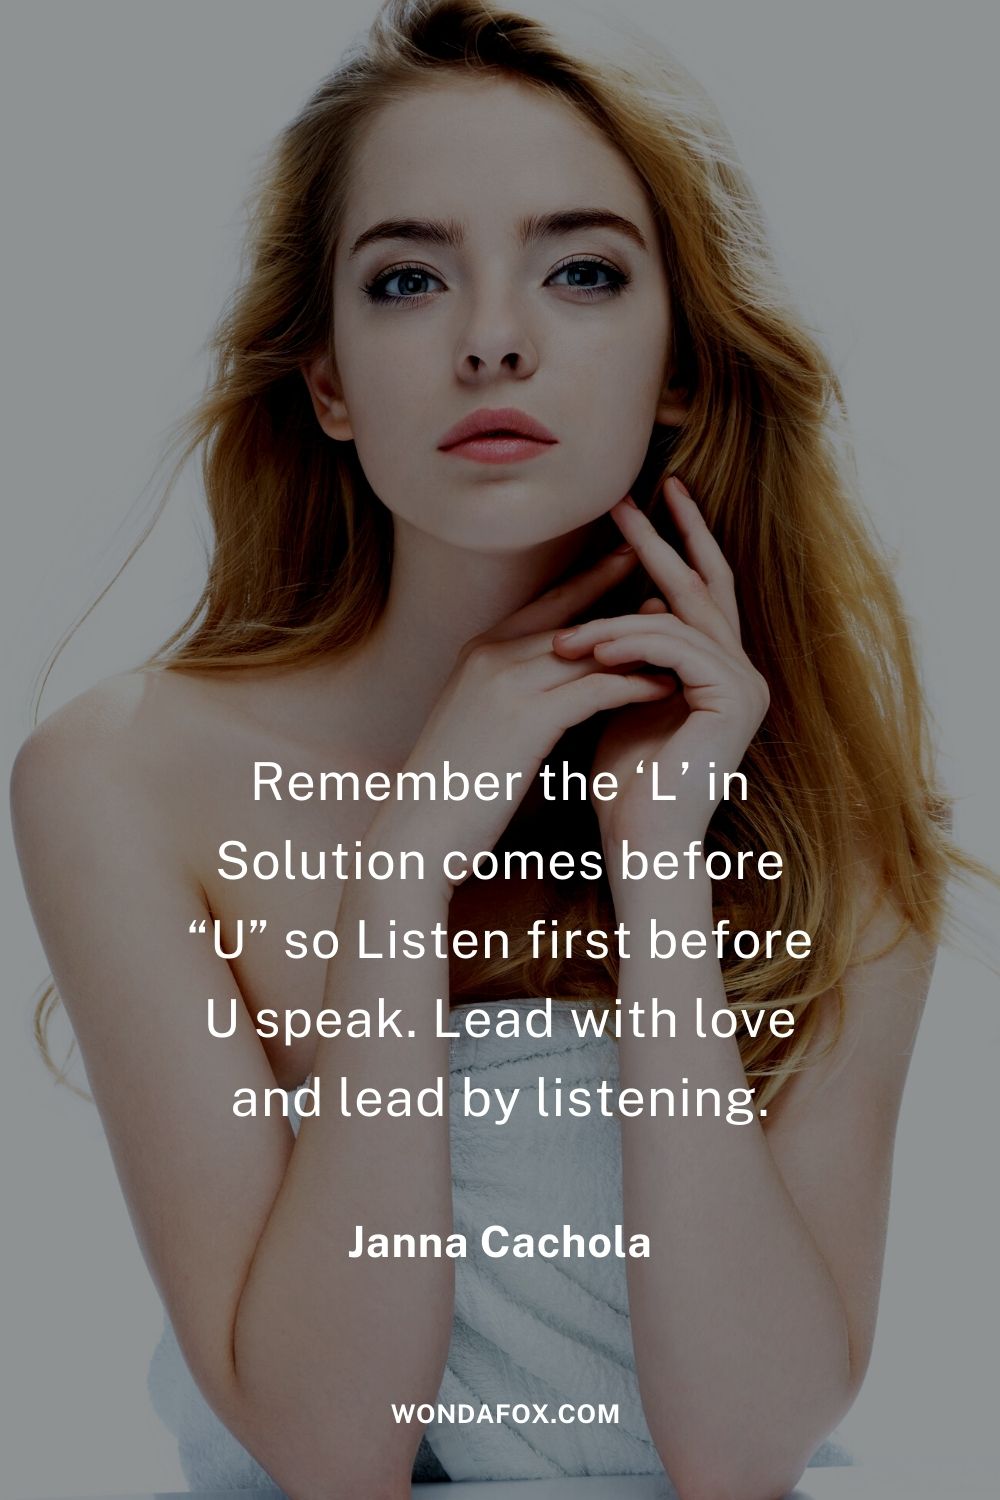 Remember the ‘L’ in Solution comes before “U” so Listen first before U speak. Lead with love and lead by listening.
boss girl quotes